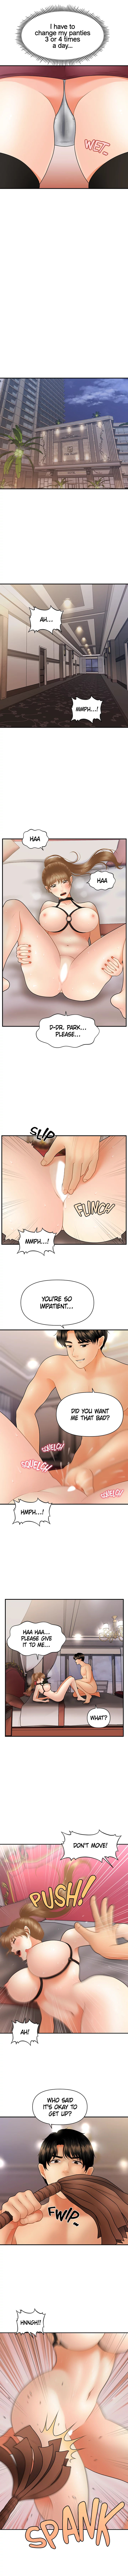 You’re so Handsome - Chapter 37 Page 3